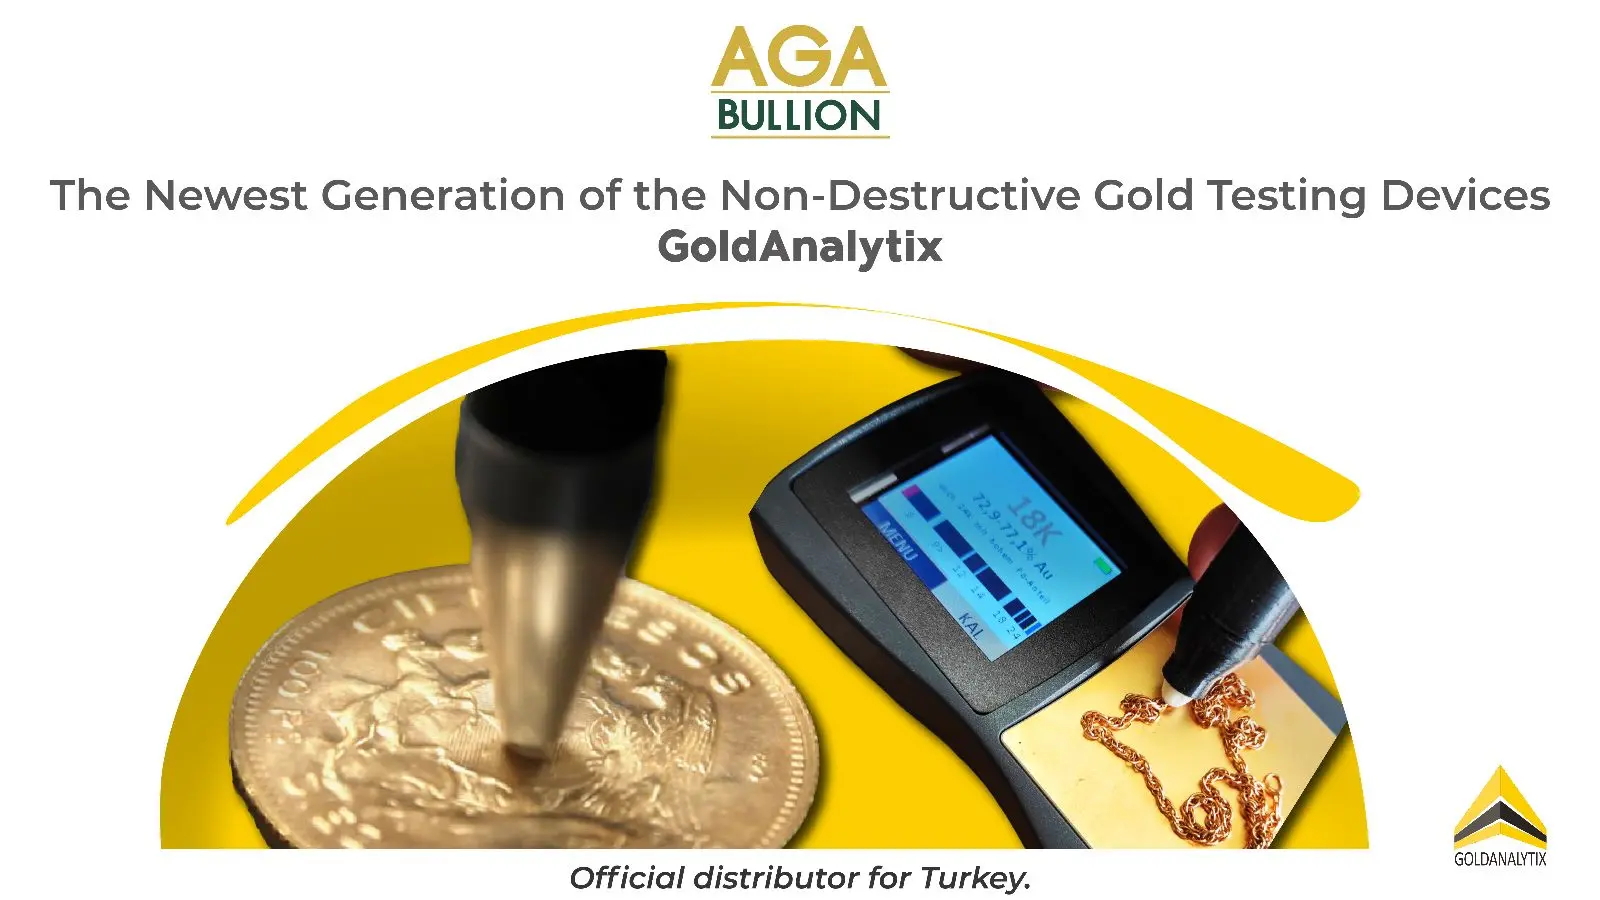 The newest generation of the non-destructive gold testing devices